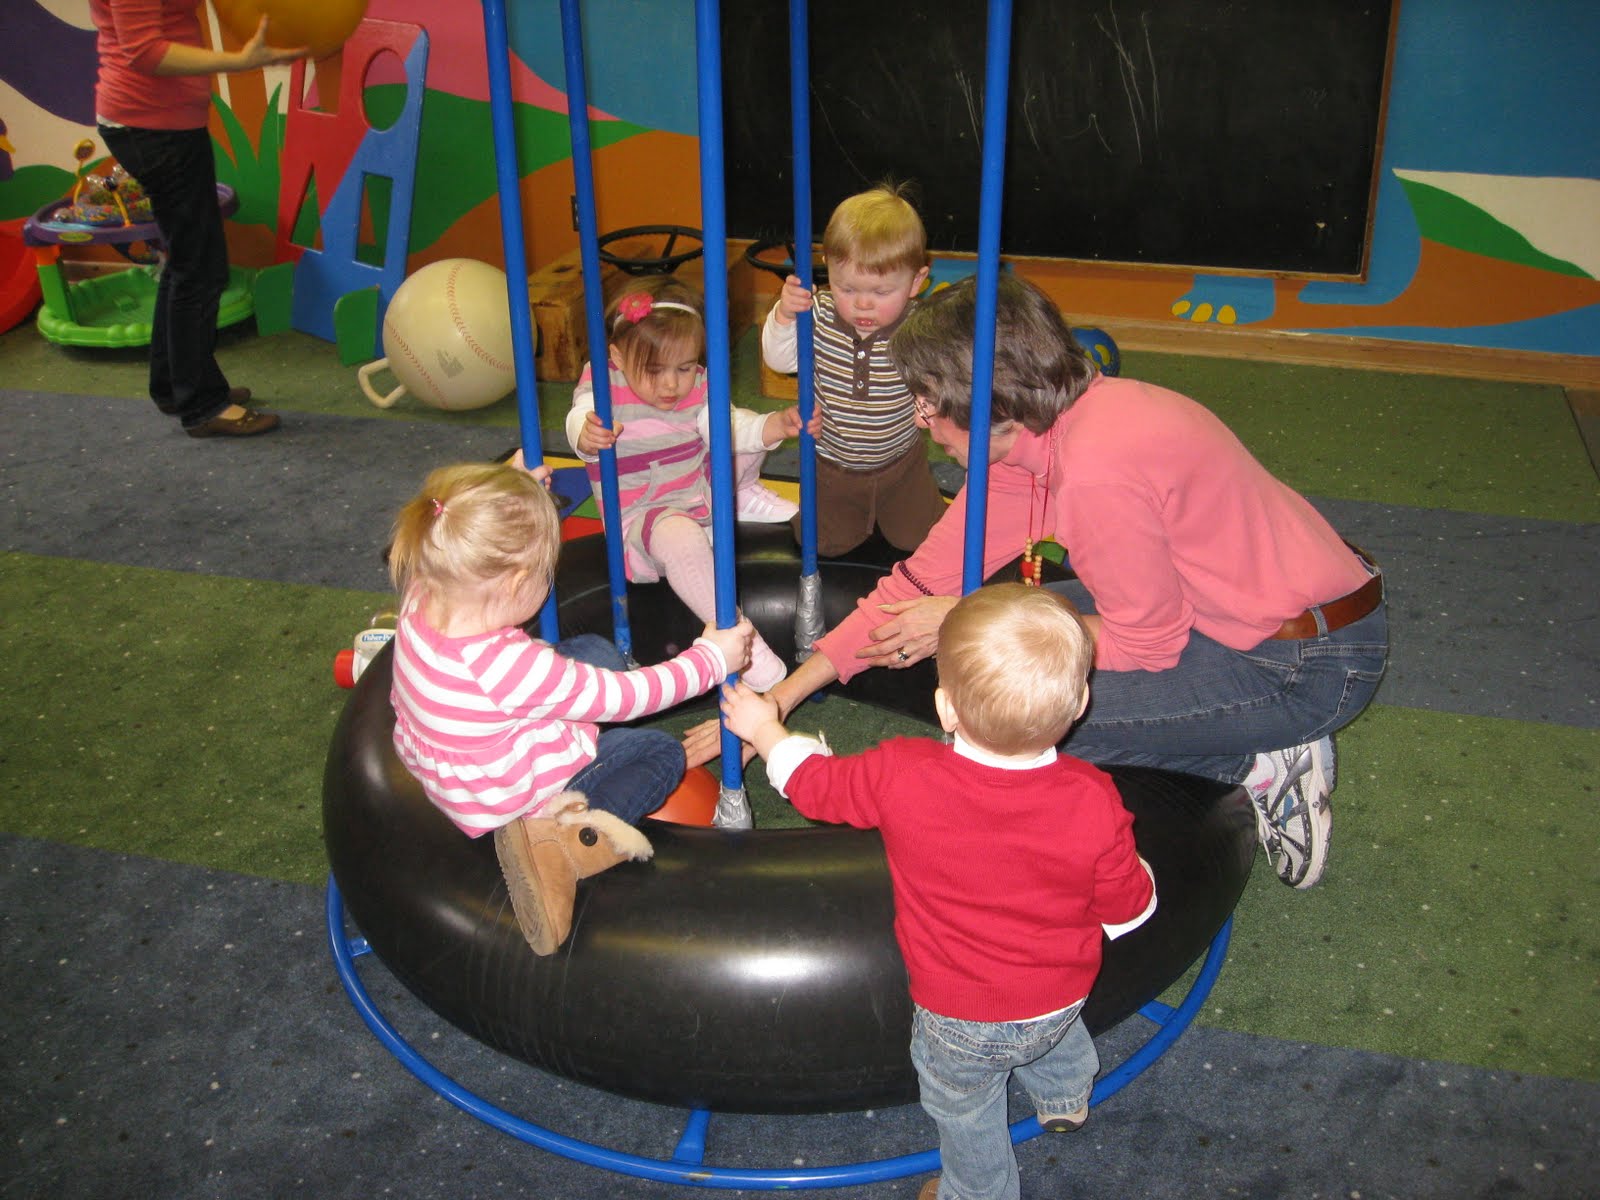 Children playing on a bouncy tire